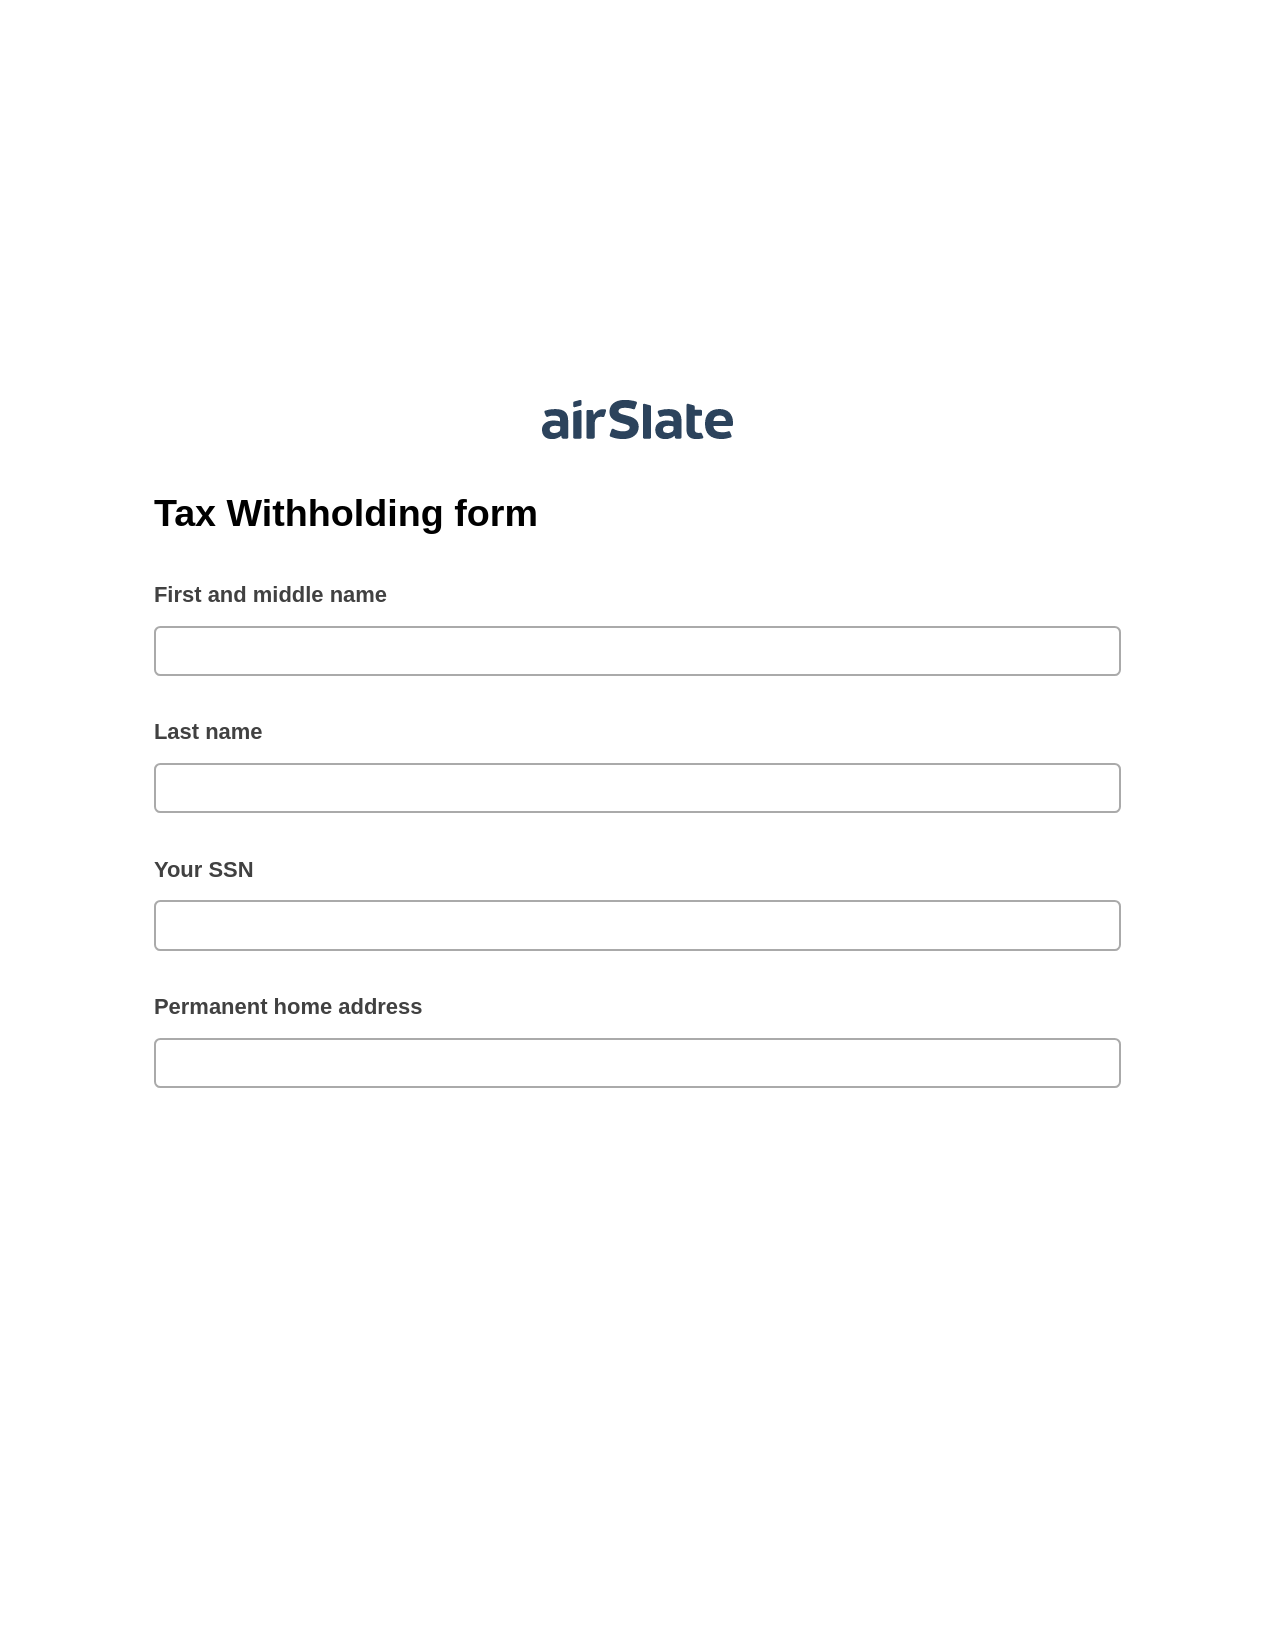 Multirole Tax Withholding form Pre-fill from Salesforce Records via SOQL Bot, Audit Trail Bot, Slack Notification Postfinish Bot